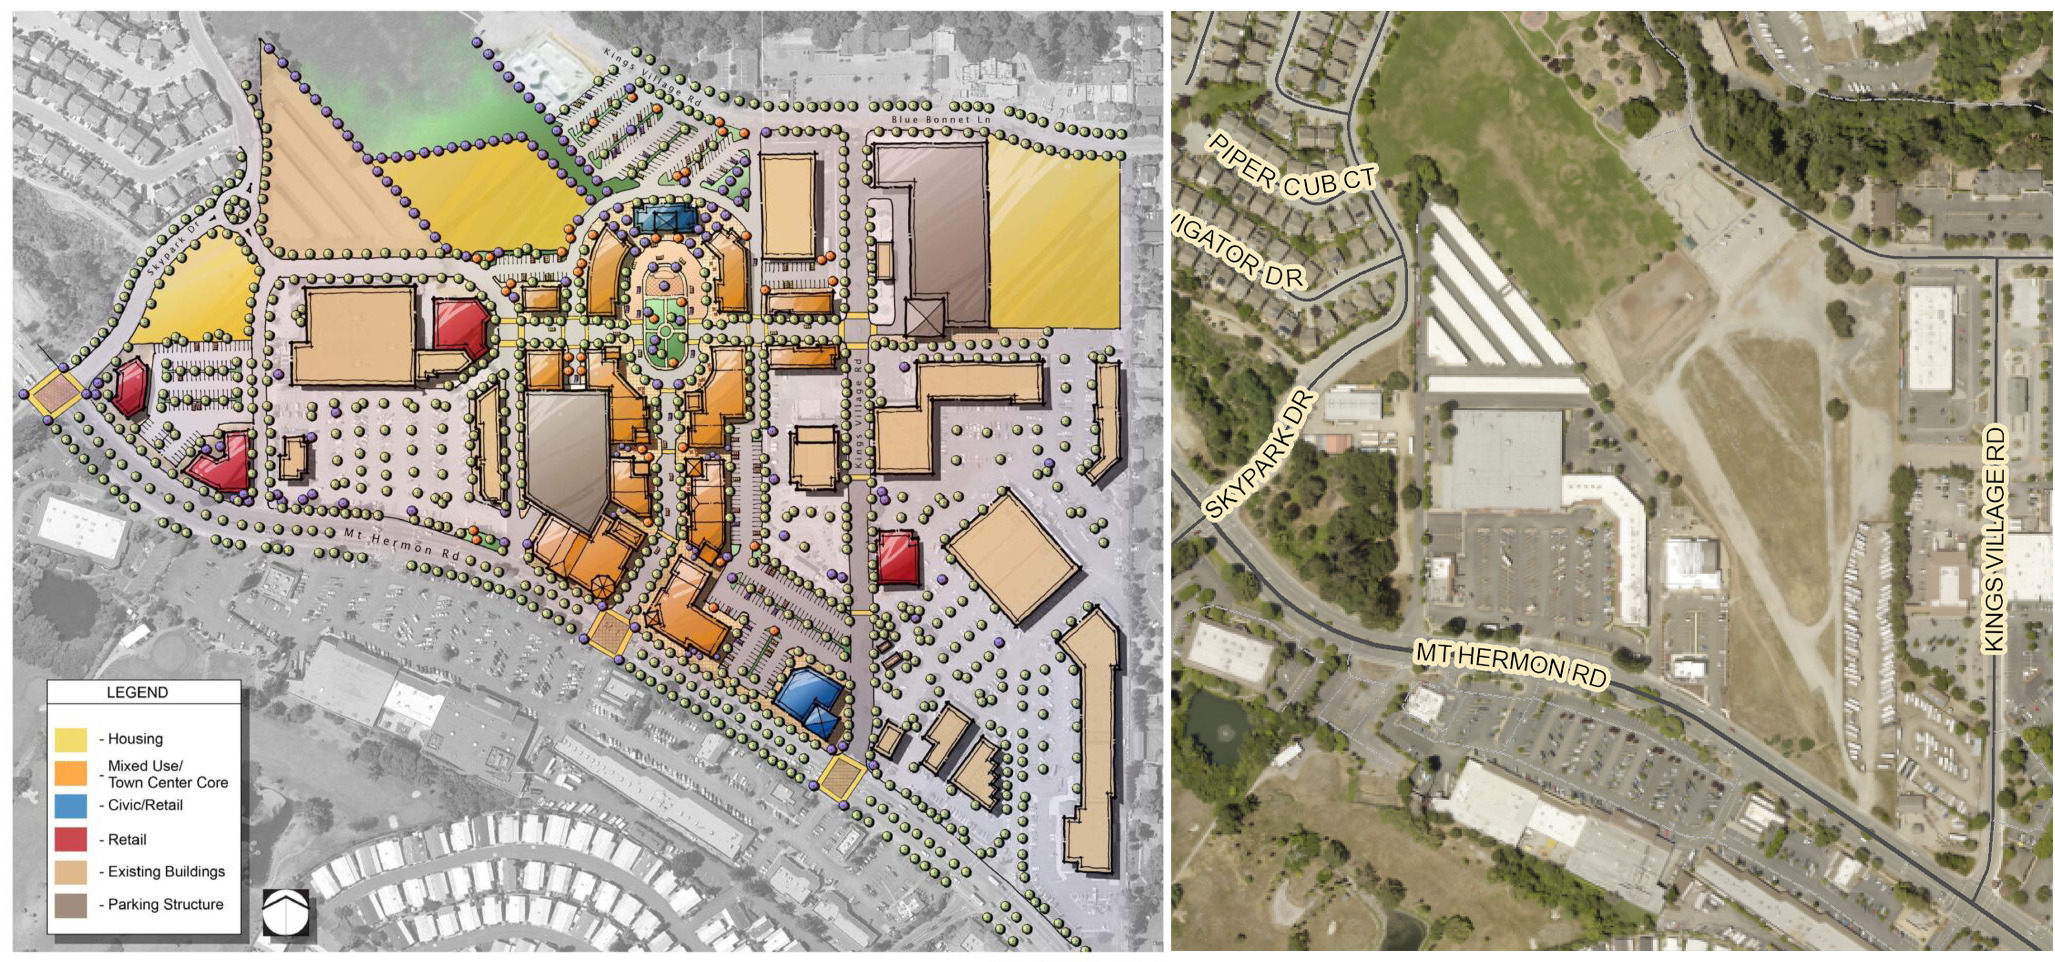 Scotts Valley’s Town Center Specific Plan from 2008, left, shows plans for housing in yellow and housing and commercial space in orange. (City of Scotts Valley and County of Santa Cruz)